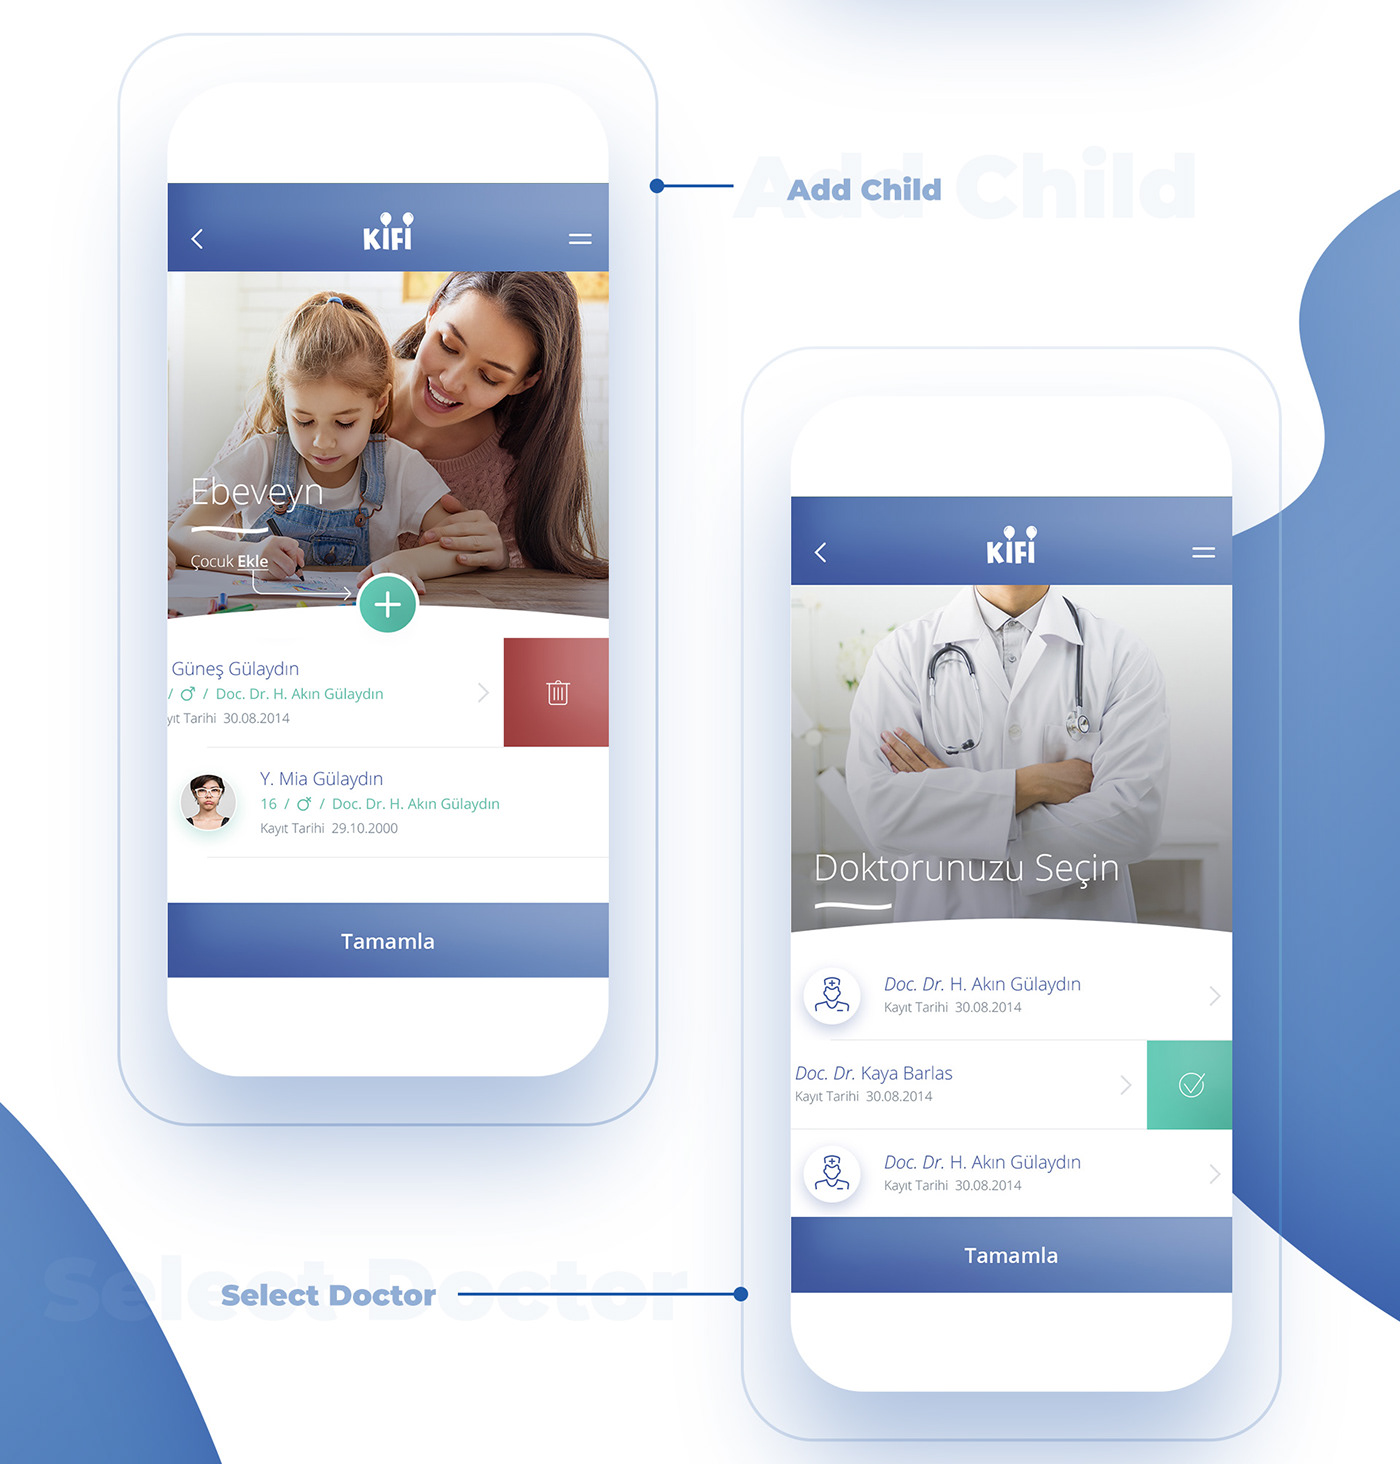 UI/UX Design user interface Mobile Application user experience interaction medical cystic fibrosis children app ios